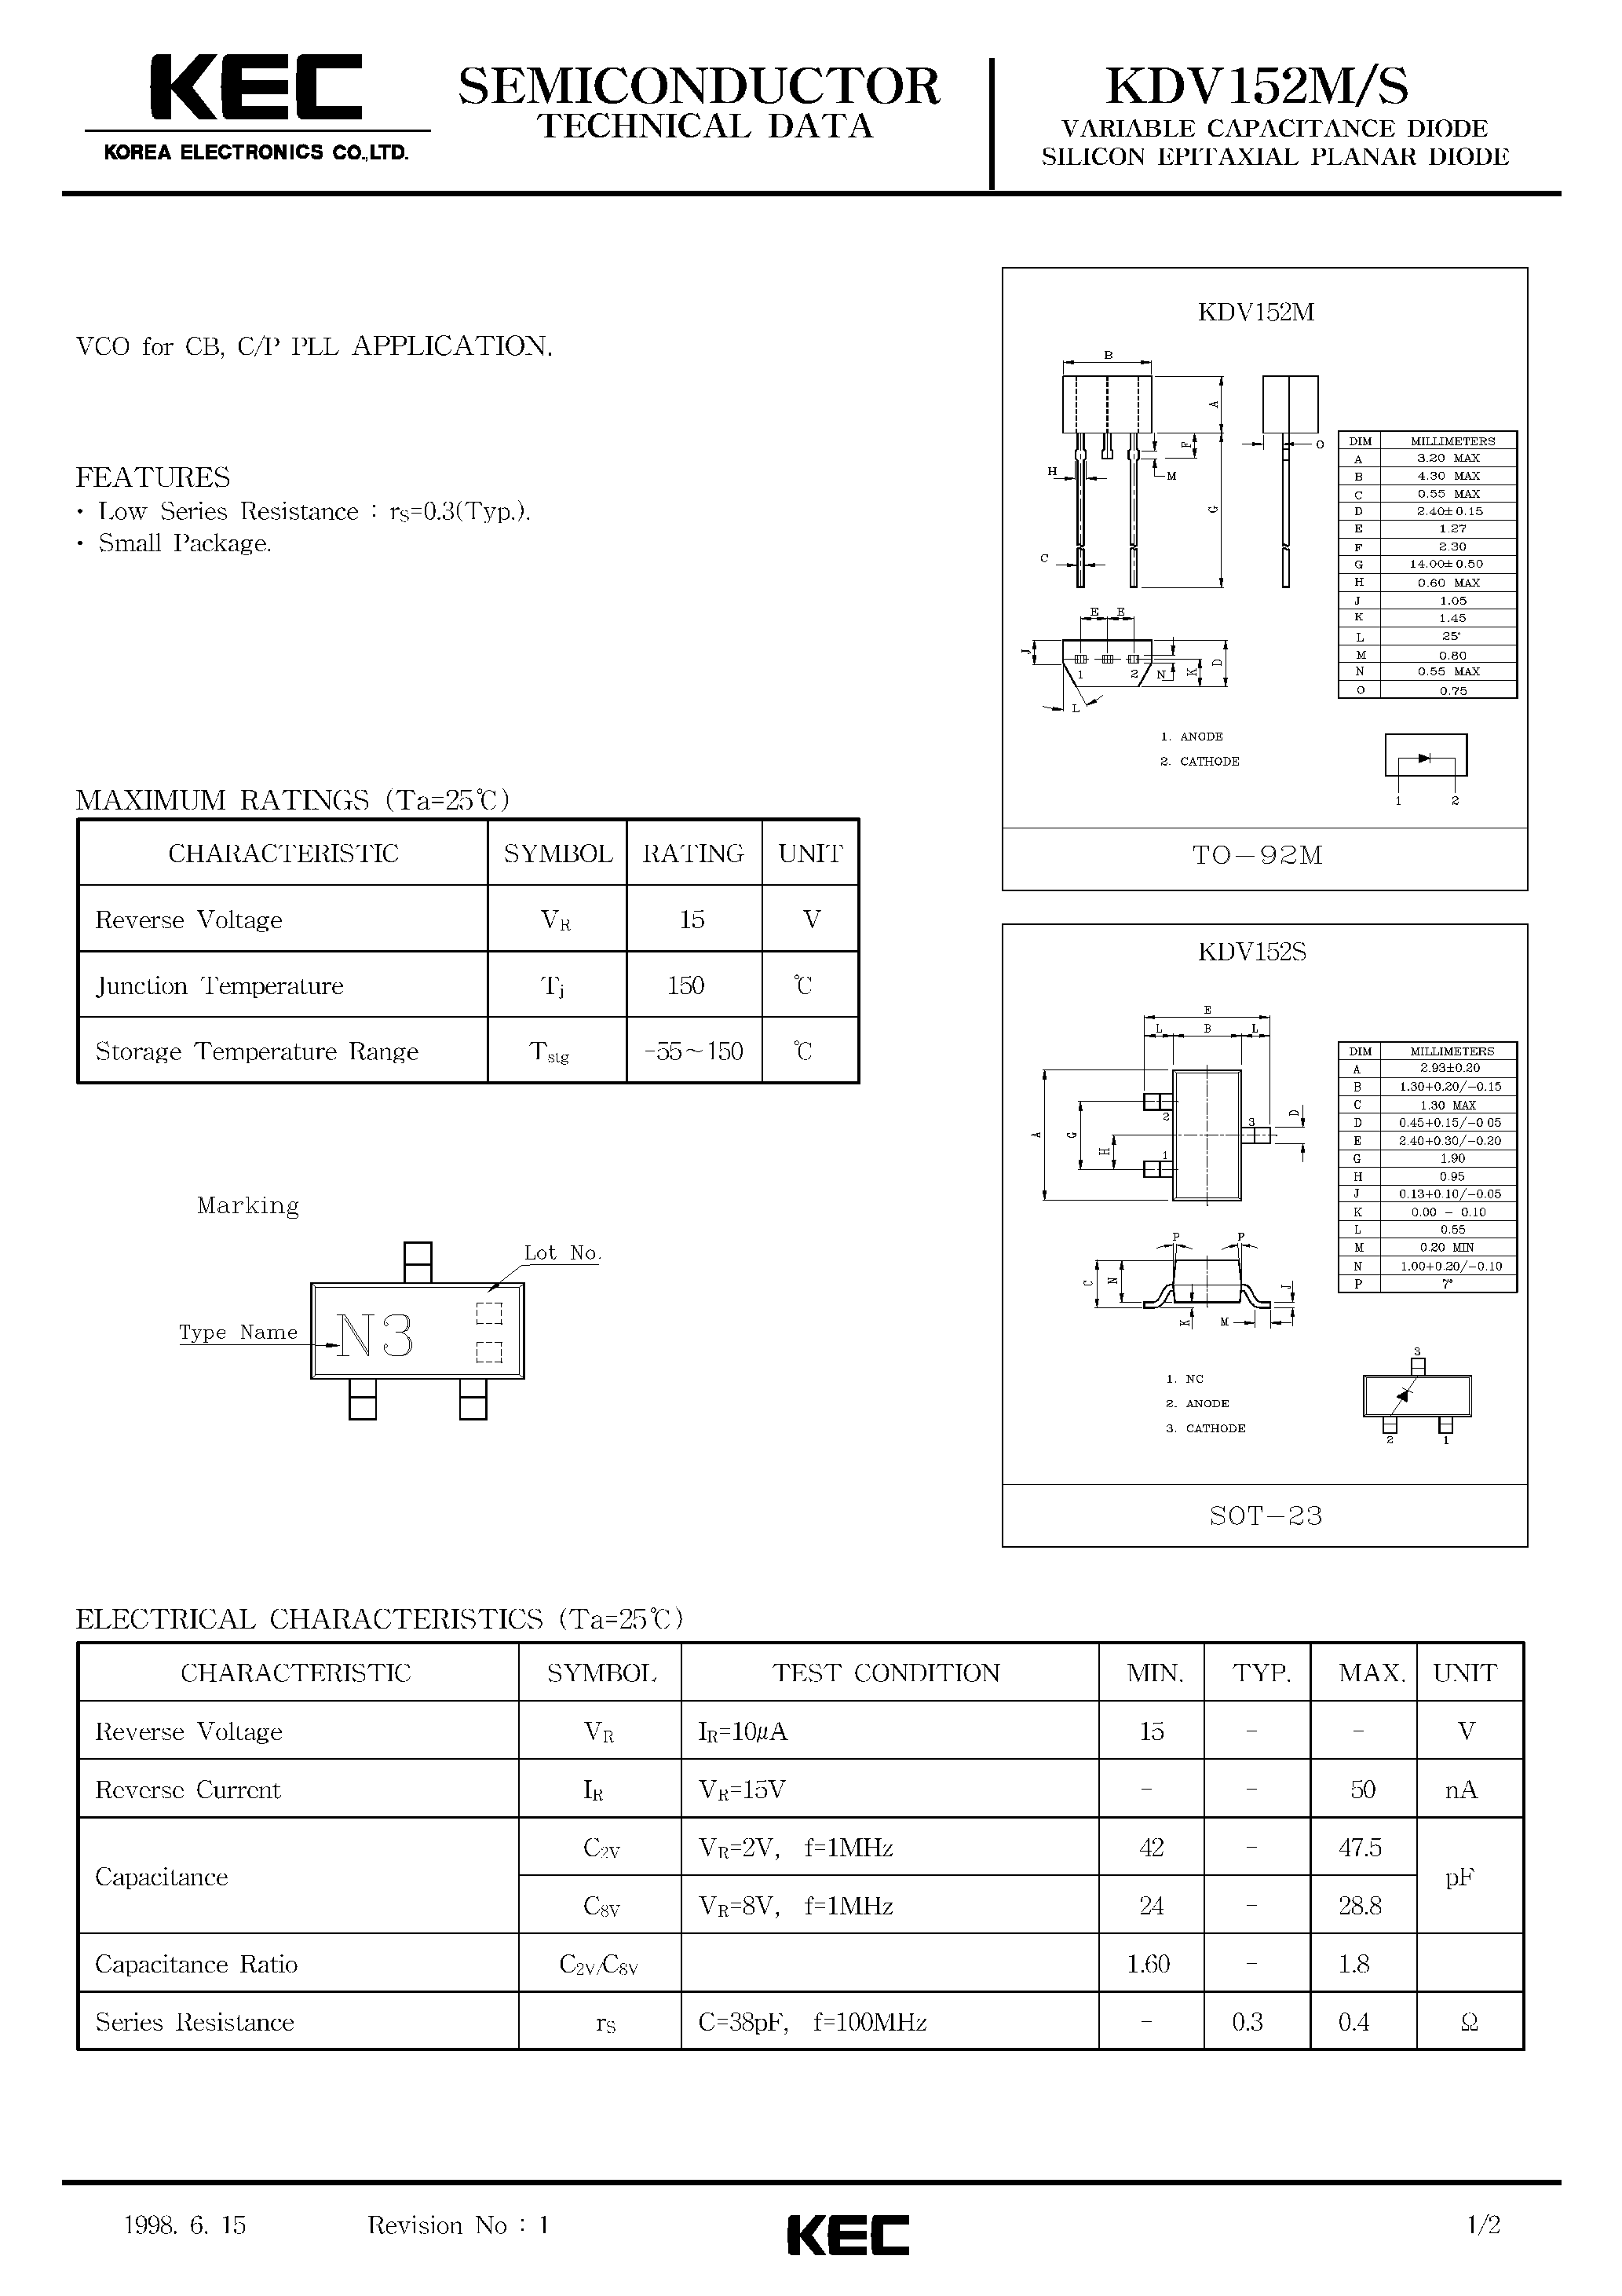 Datasheet KDV152M - VARIABLE CAPACITANCE DIODE SILICON EPITAXIAL PLANAR DIODE(VCO FOR CB/C/P PLL) page 1